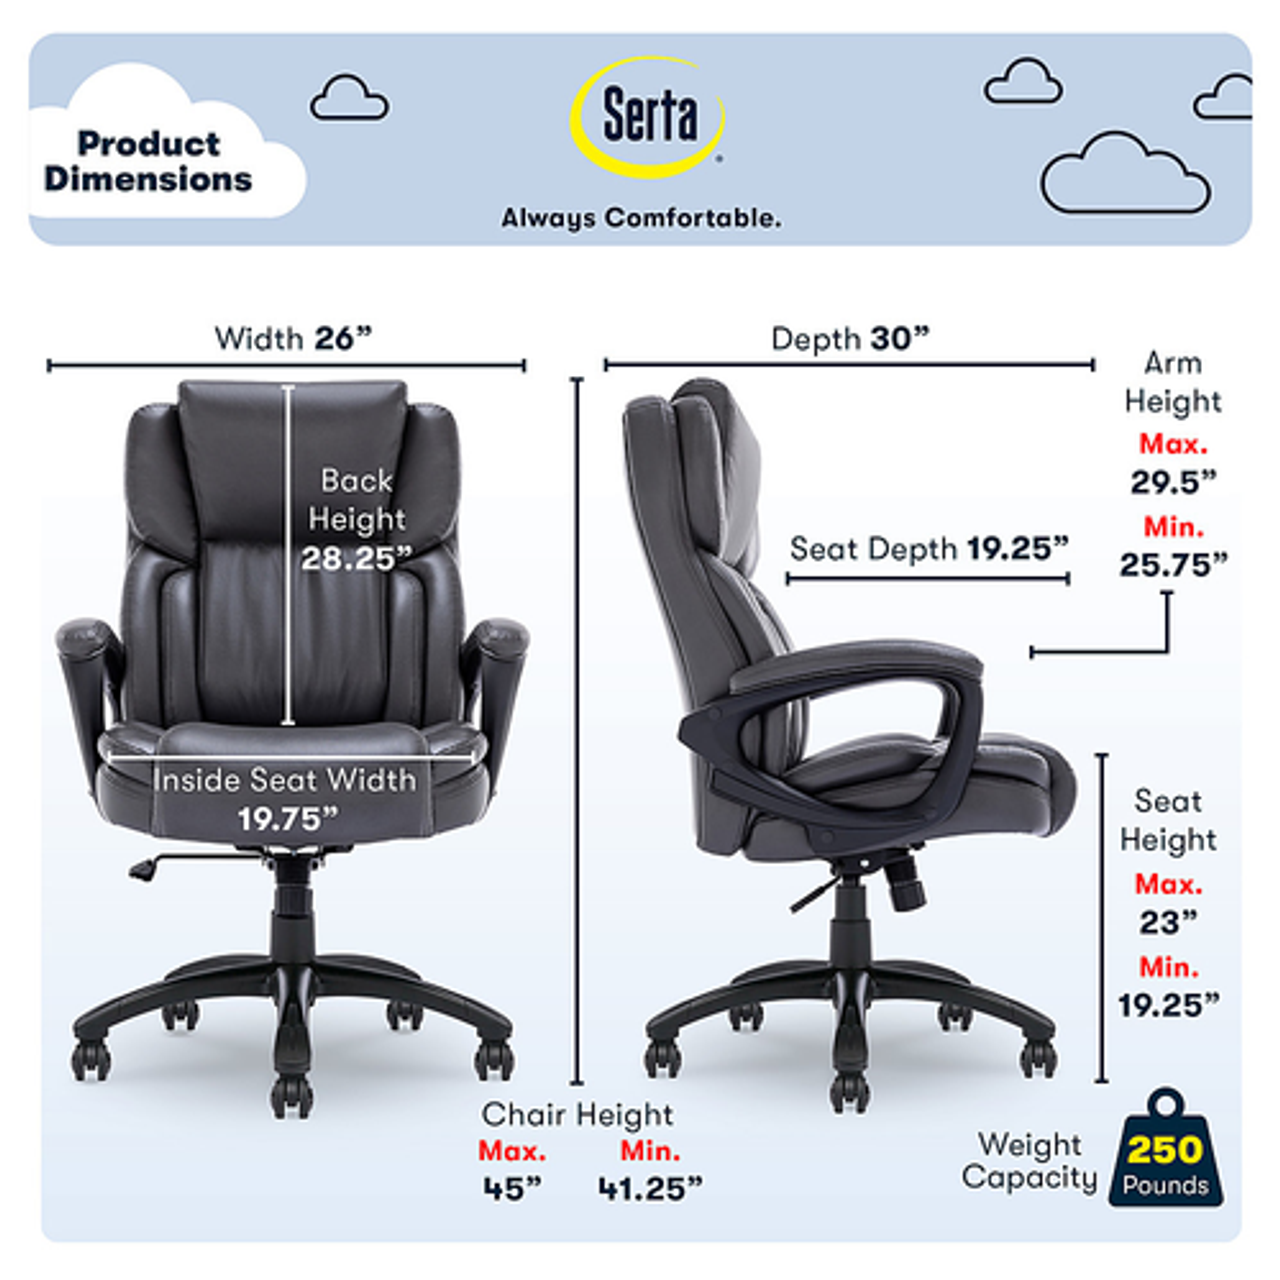 Serta - Garret Bonded Leather Executive Office Chair with Premium Cushioning - Sapce Gray